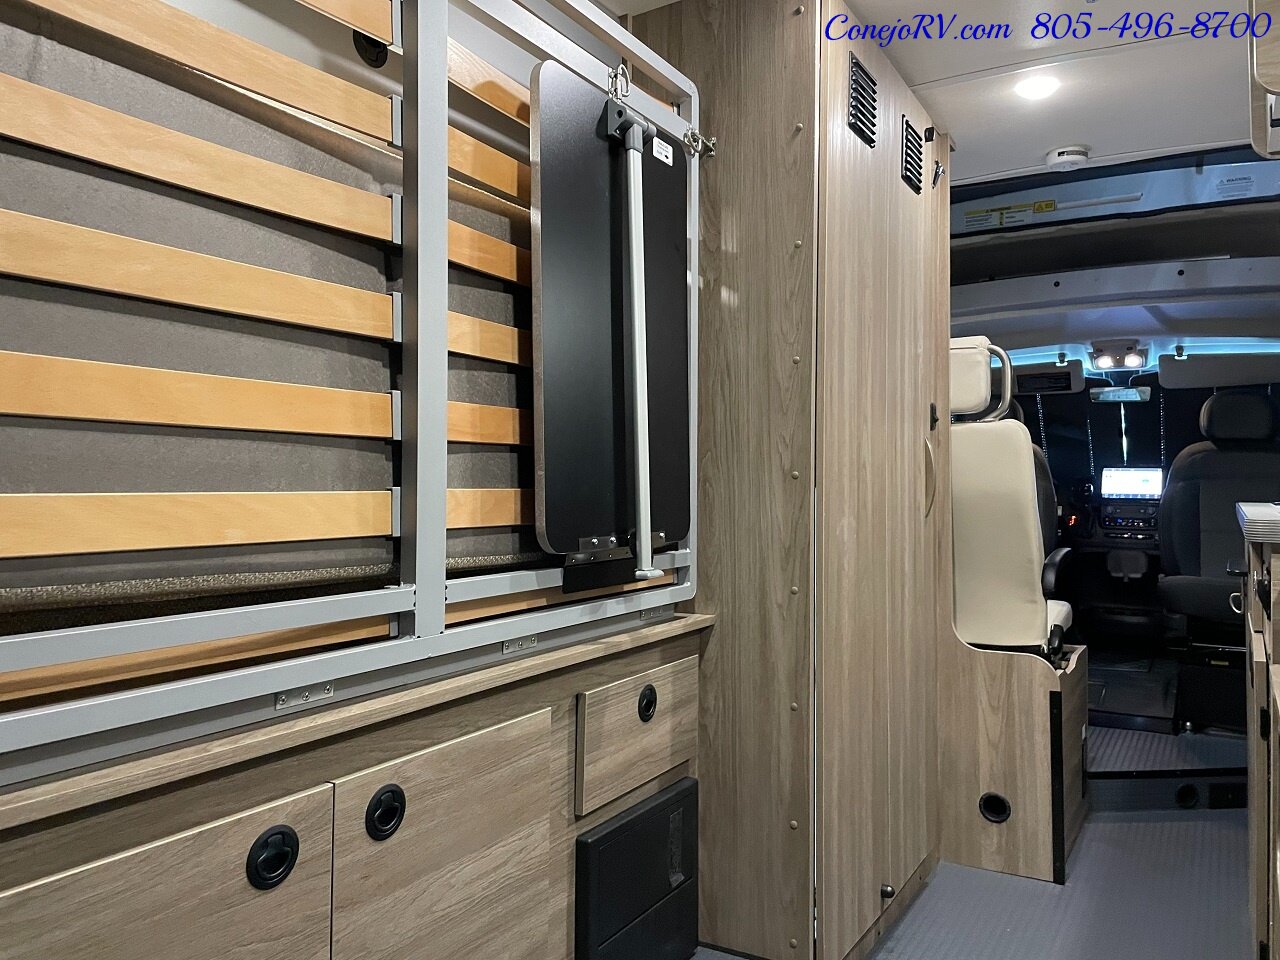 2023 WINNEBAGO Solis 59PX Murphy Bed Pop Top Full Galley New Chassis   - Photo 29 - Thousand Oaks, CA 91360